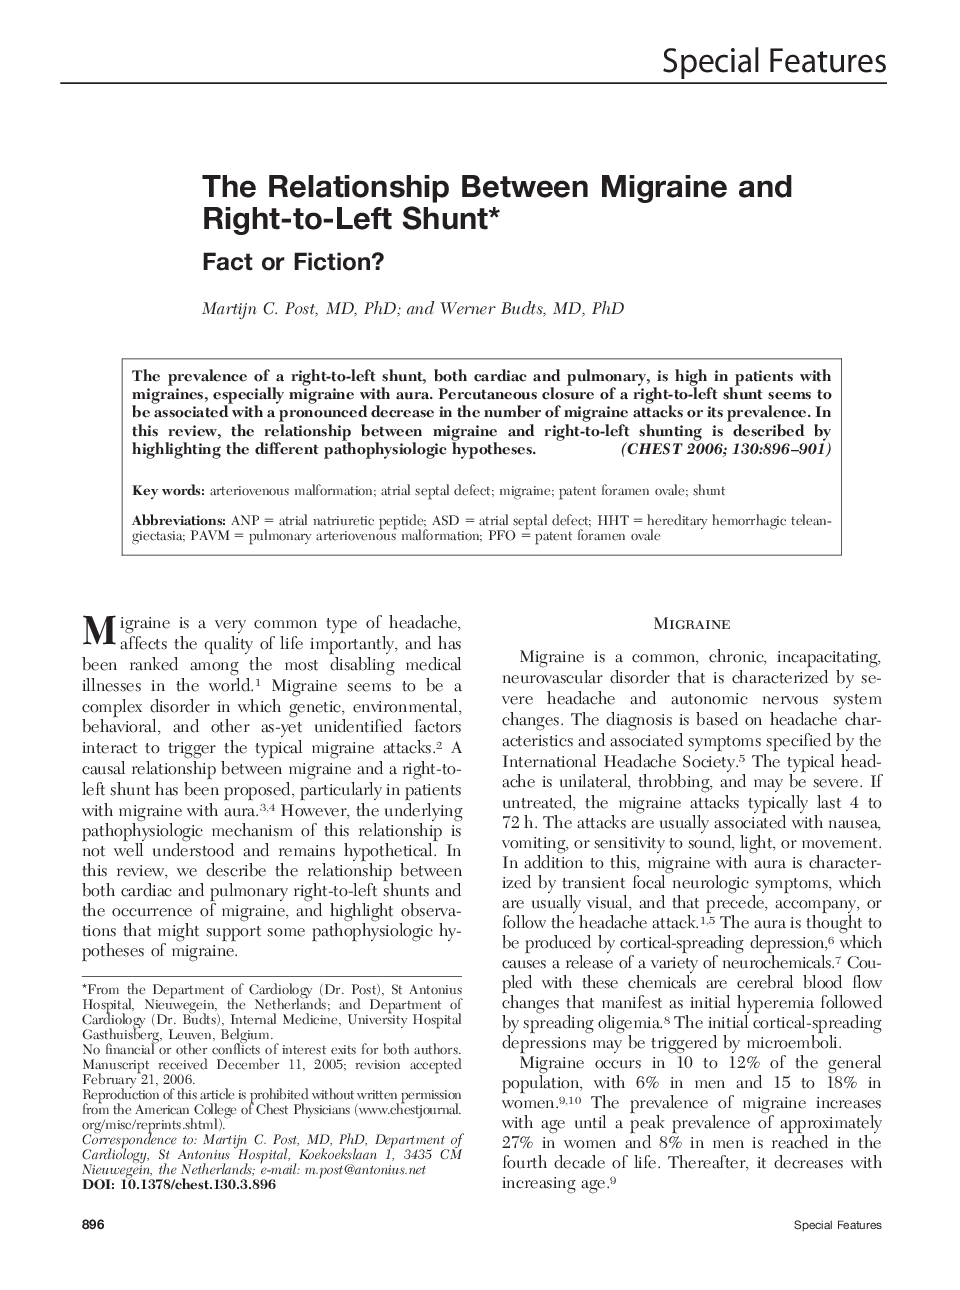 The Relationship Between Migraine and Right-to-Left Shunt